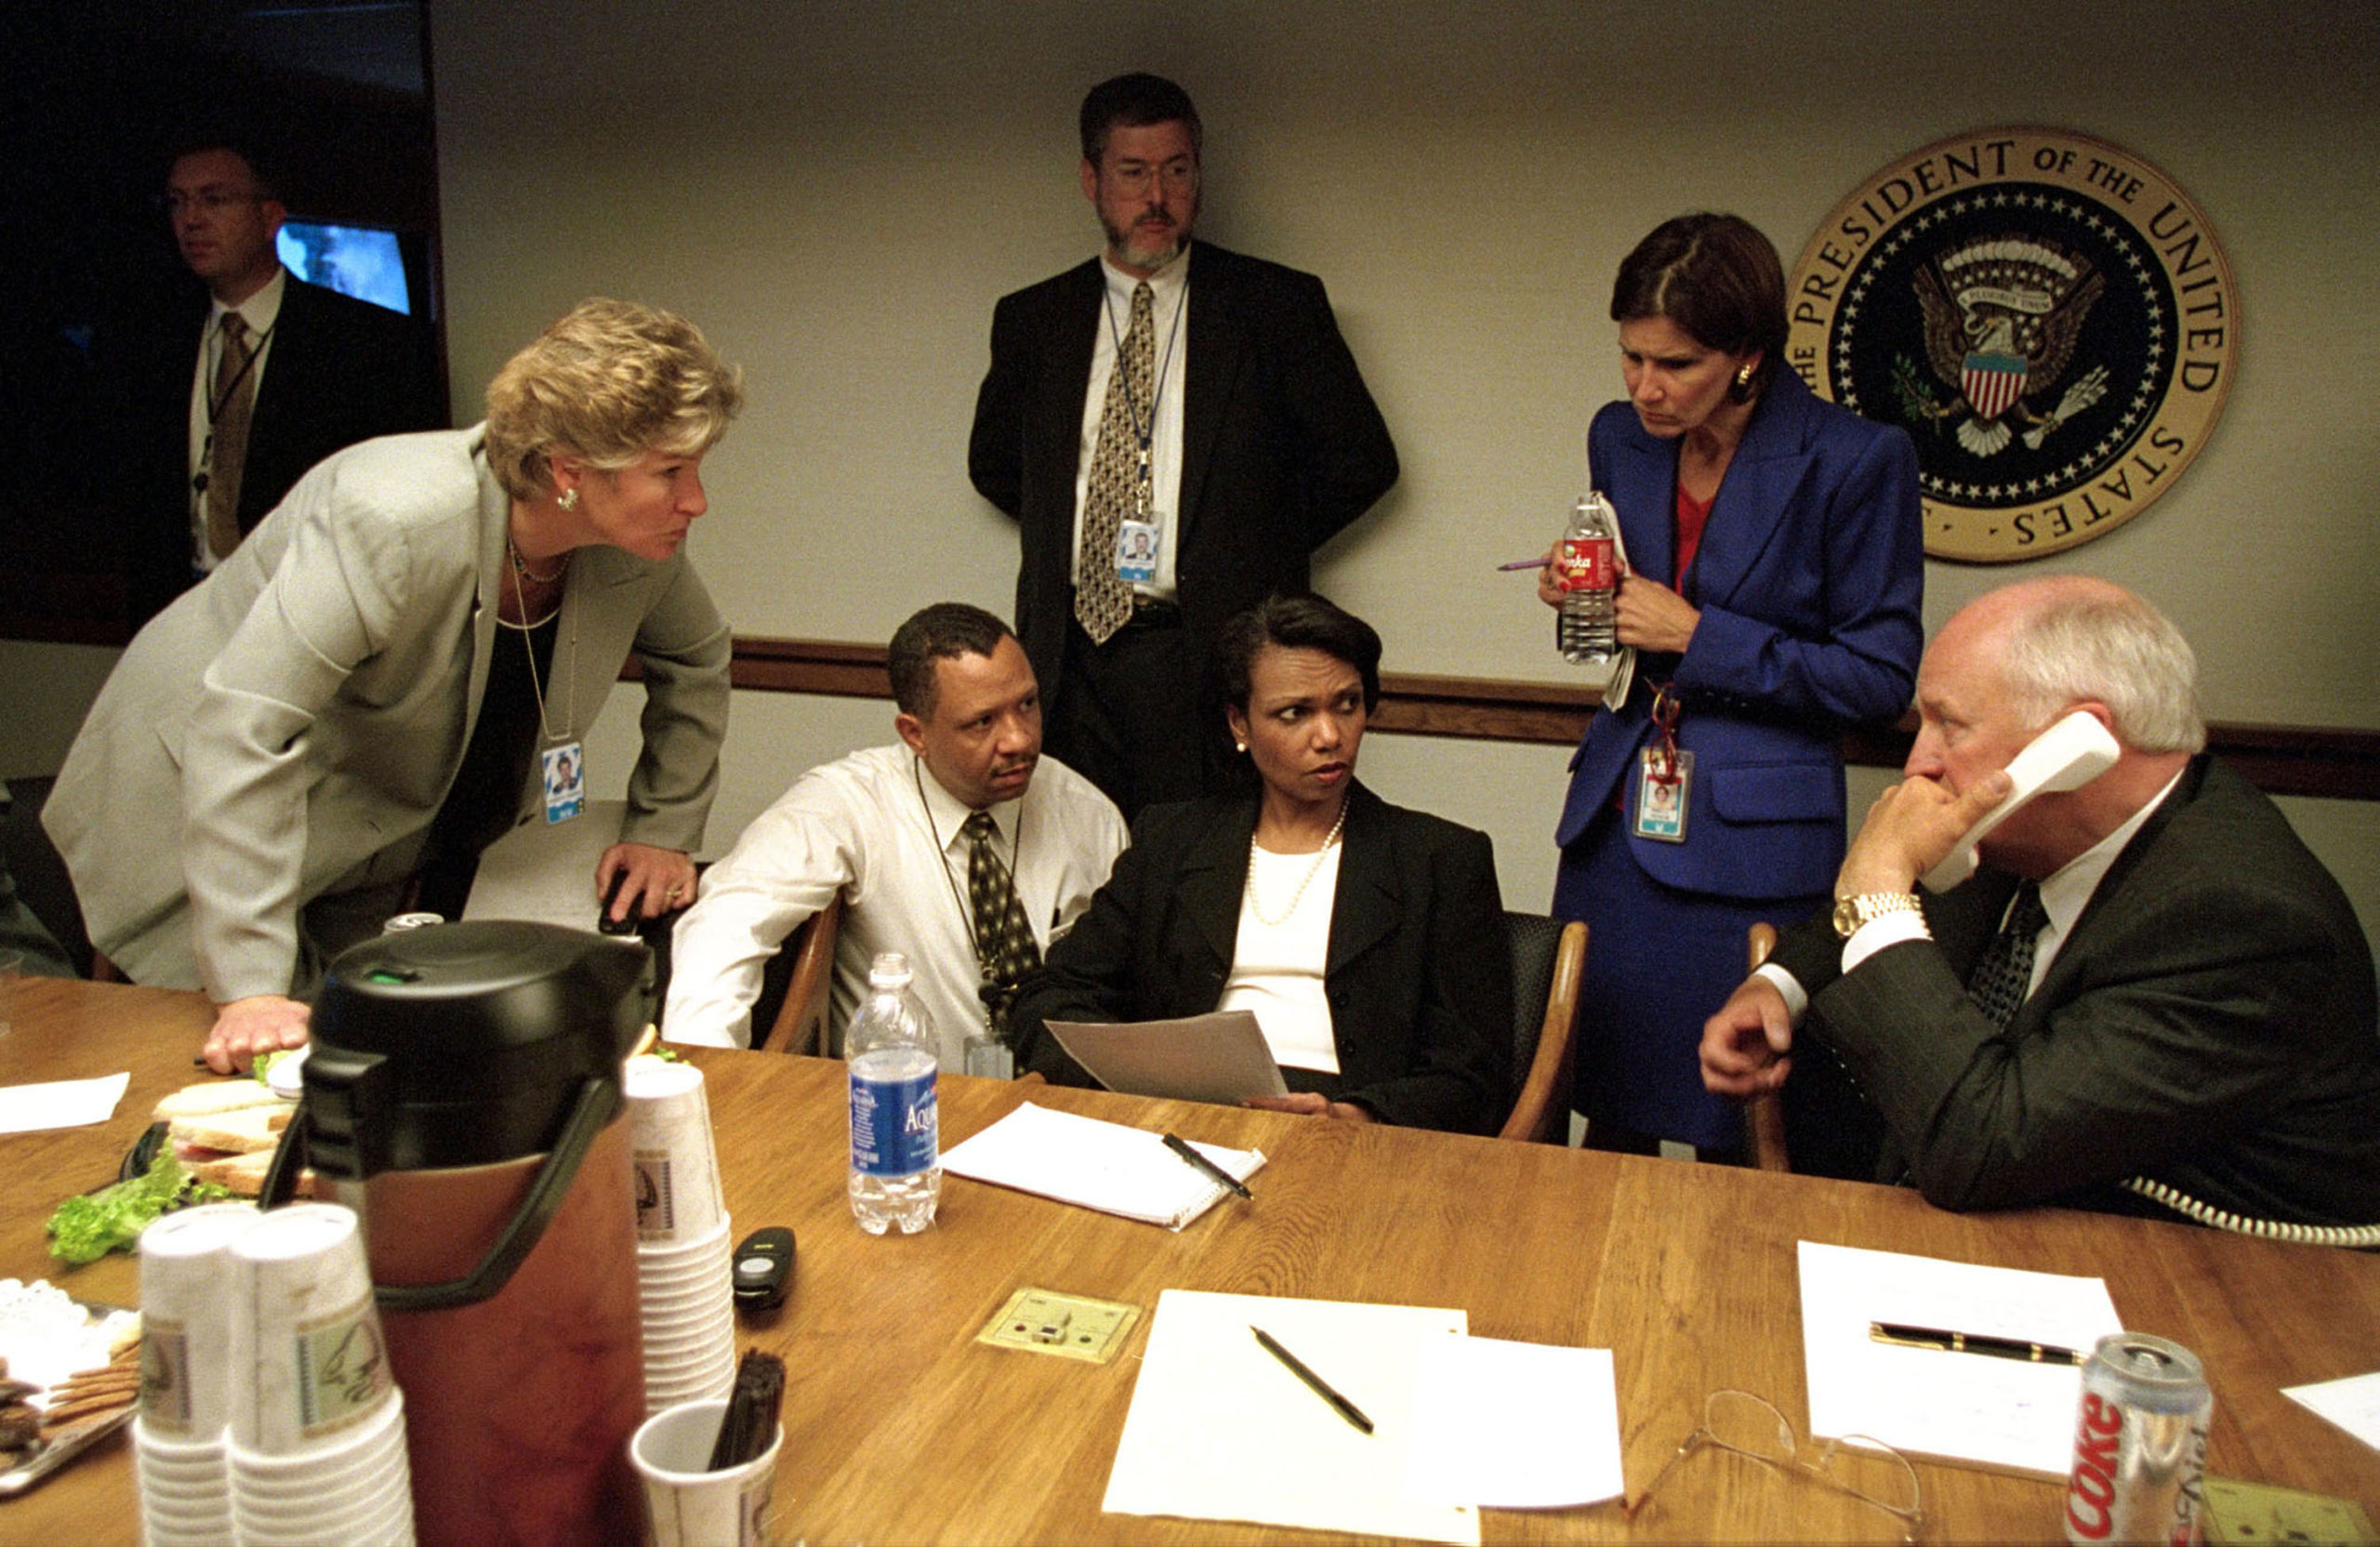 The Presidential Emergency Operations Centre on September 11, 2001 (Photo: Getty Images/U.S. National Archives)